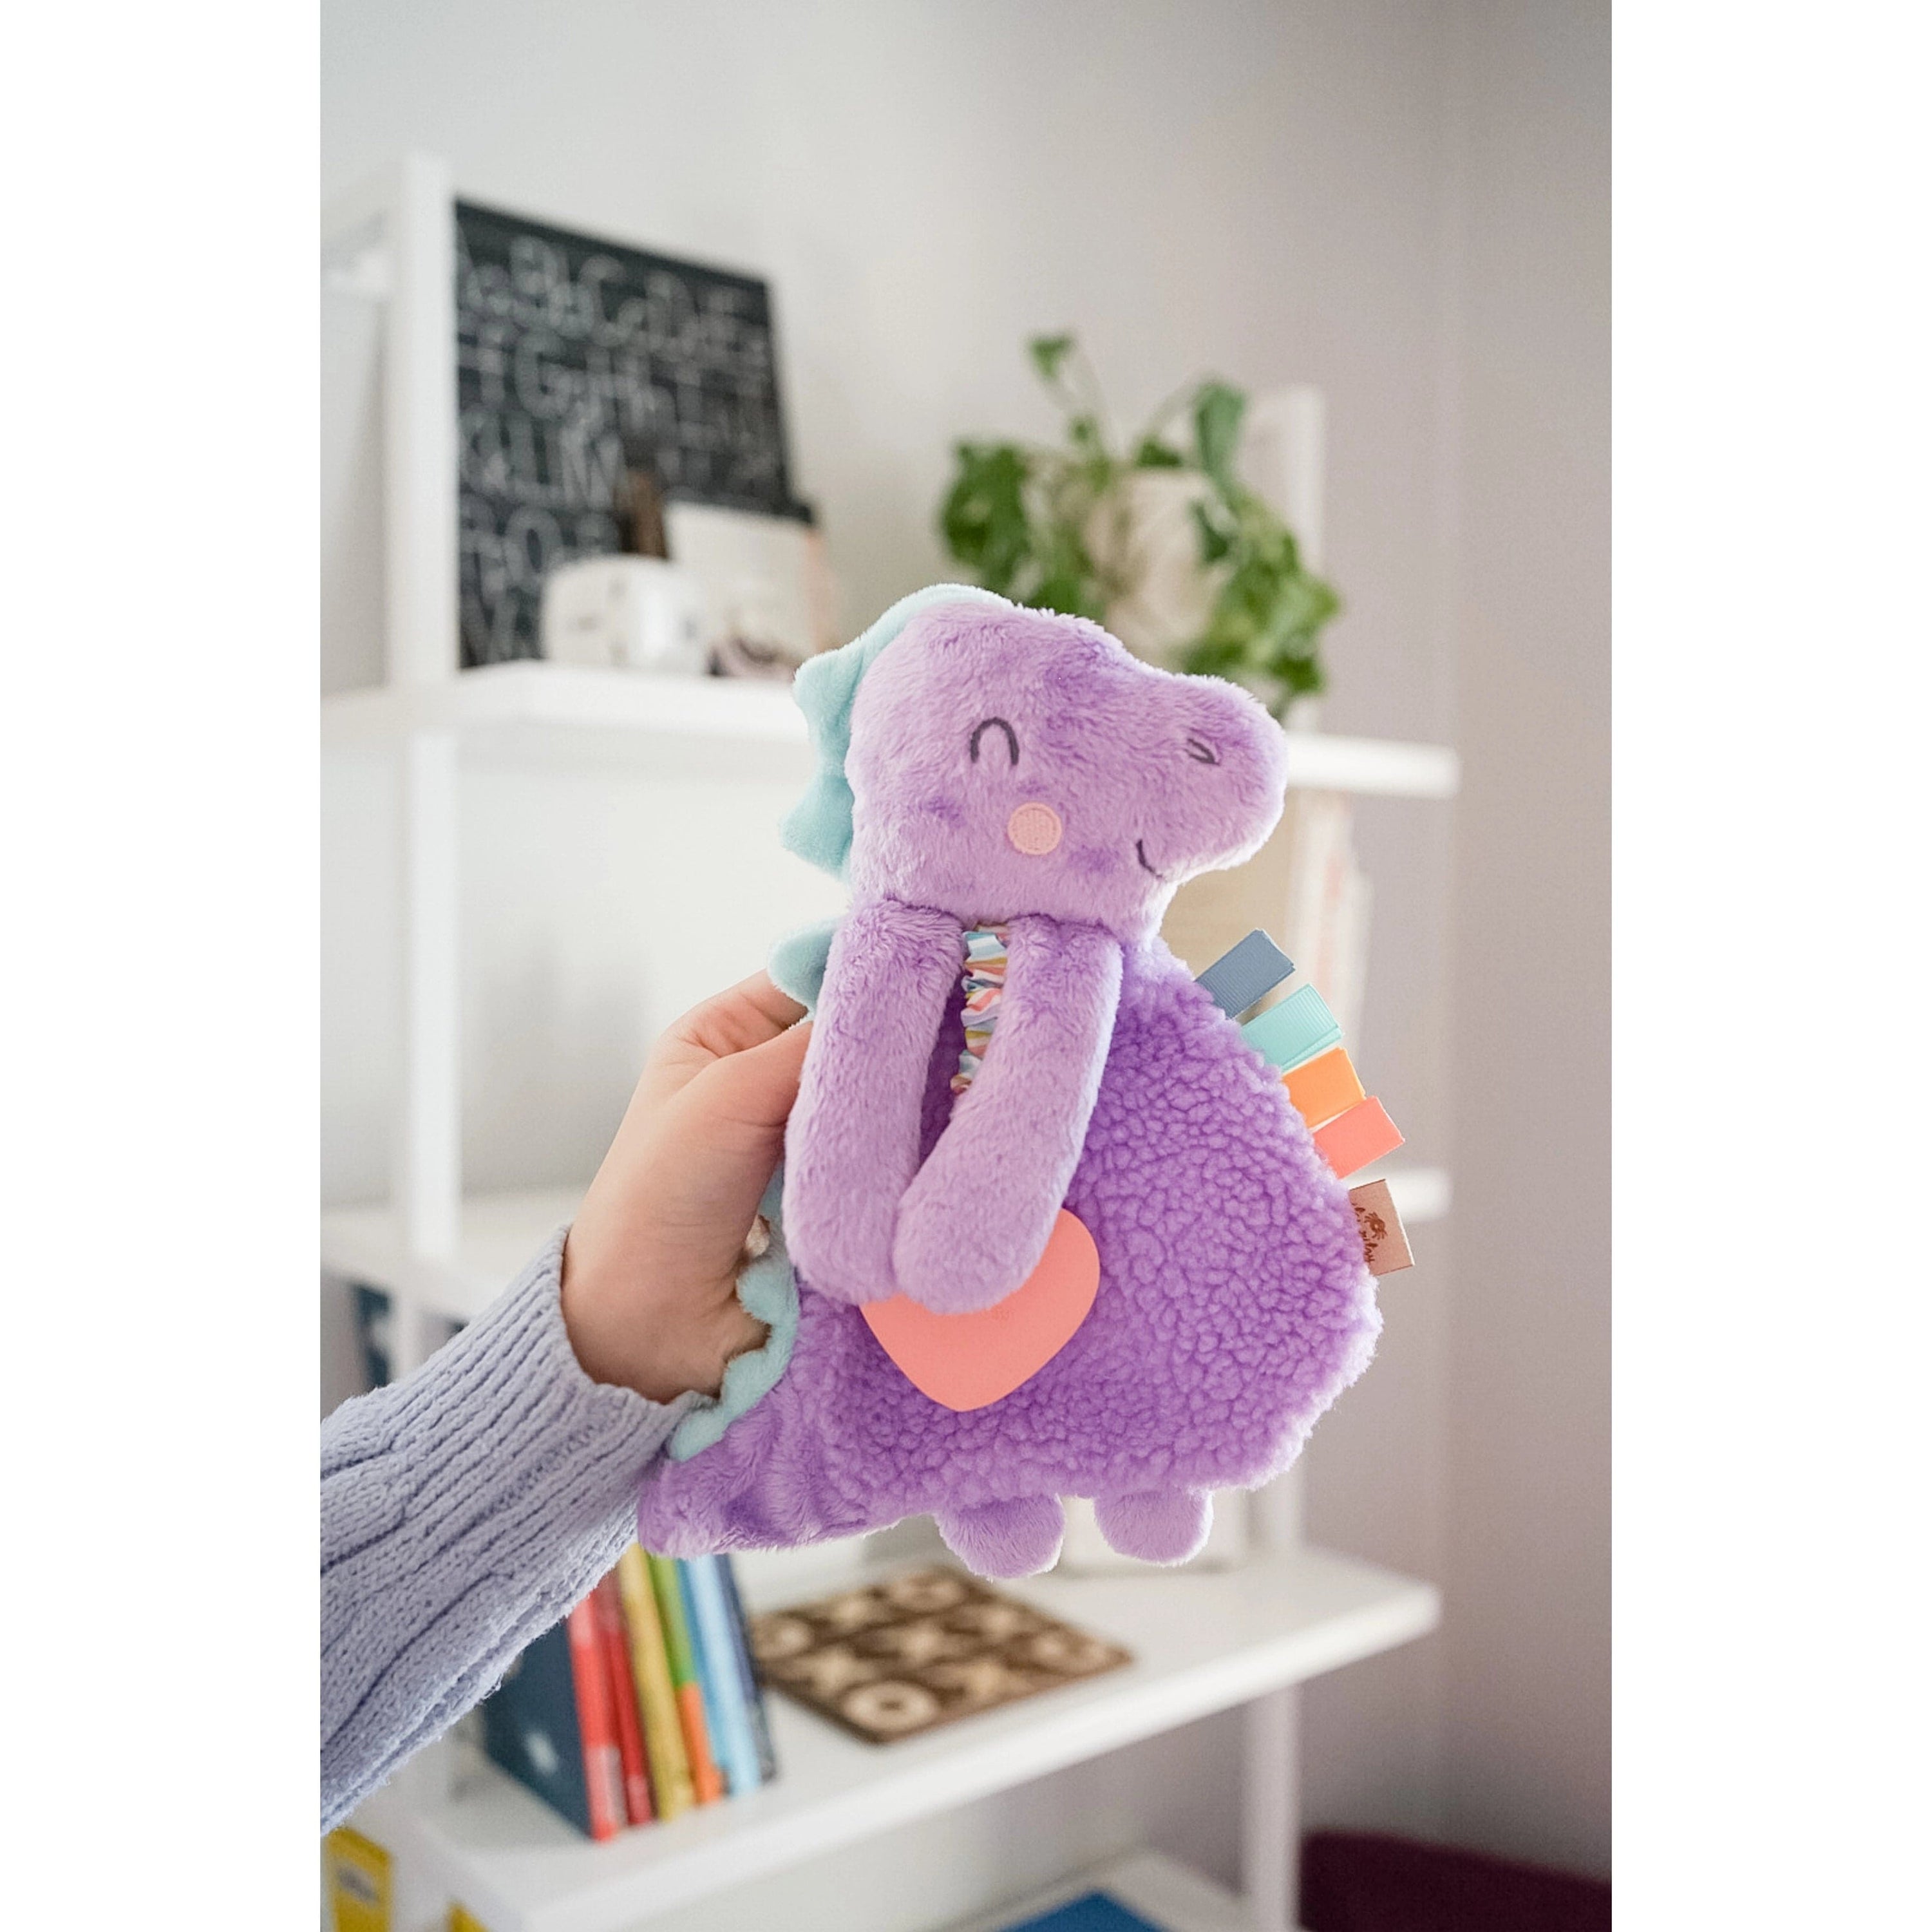 Dempsey the Dino Itzy Friends Itzy Lovey™ Plush with Silicone Teether Toy Itzy Ritzy Lil Tulips